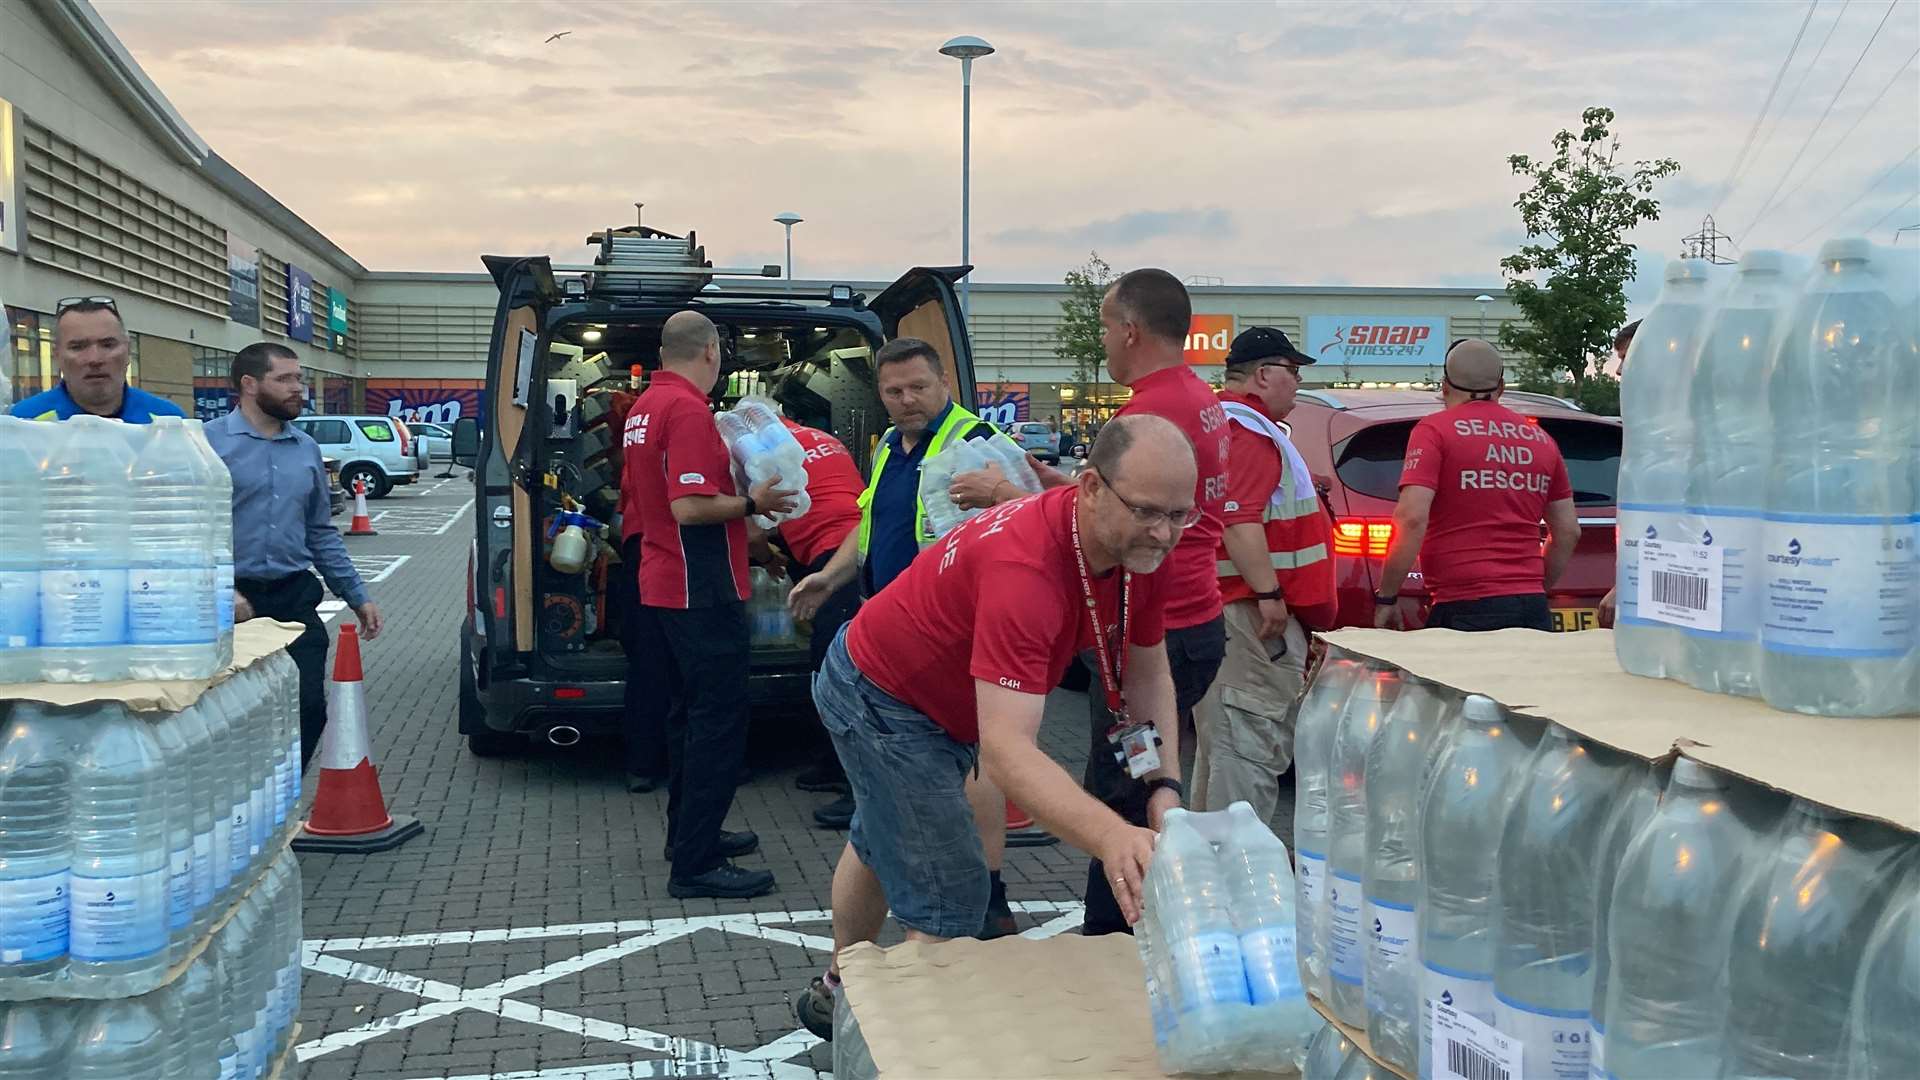 Kent's Search and Rescue volunteers loading water bottles into cars and vans at Neats Court retail park, Queenborough